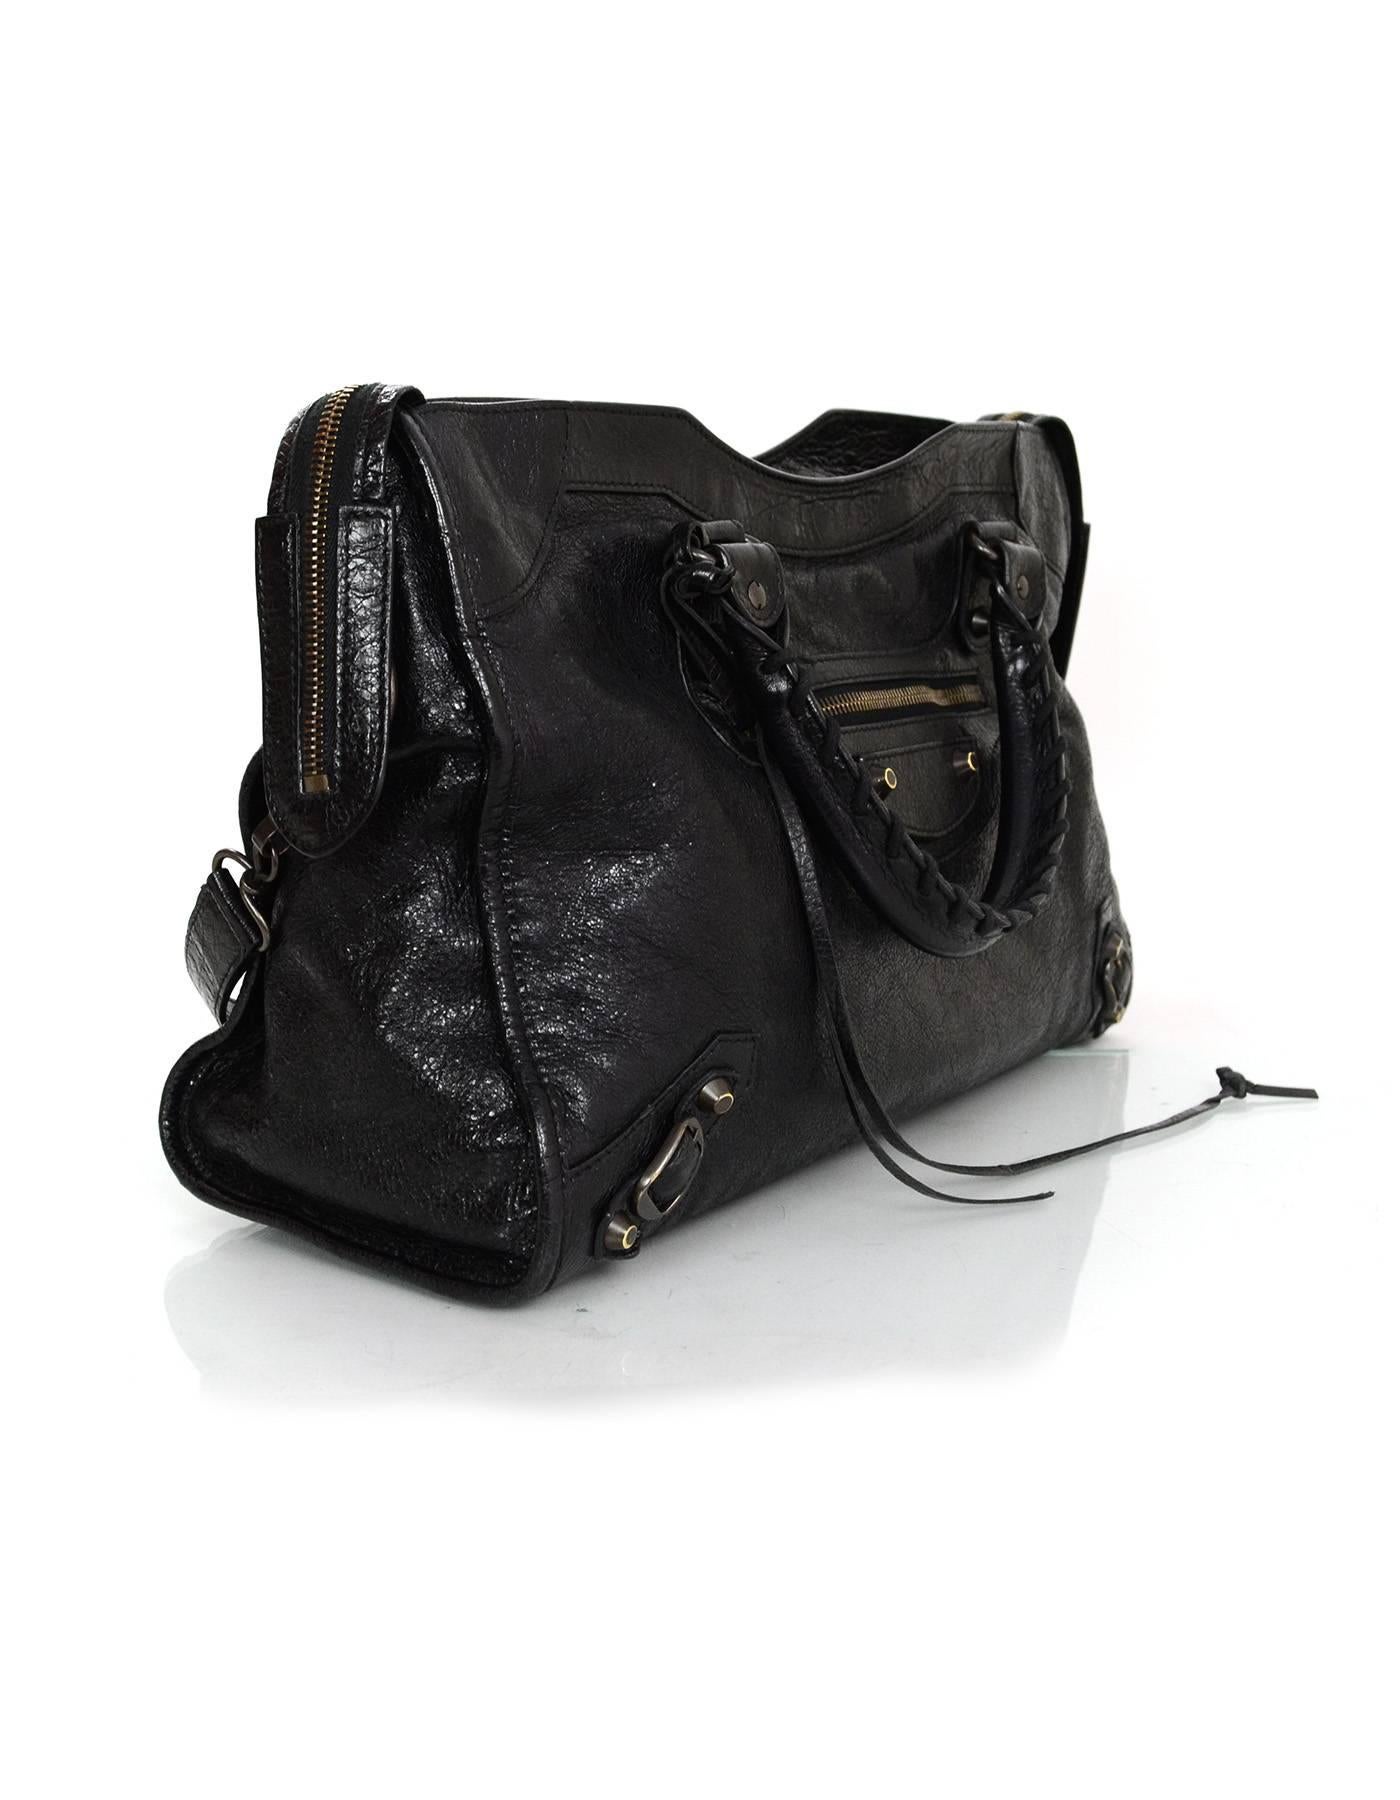 Balenciaga Black Classic City Bag
Features optional shoulder/crossbody strap

Made In: Italy
Year Of Production: 2014
Color: Black
Hardware: Bronze
Materials: Distressed leather
Lining: Black cotton
Closure/Opening: Double zip top
Exterior Pockets: